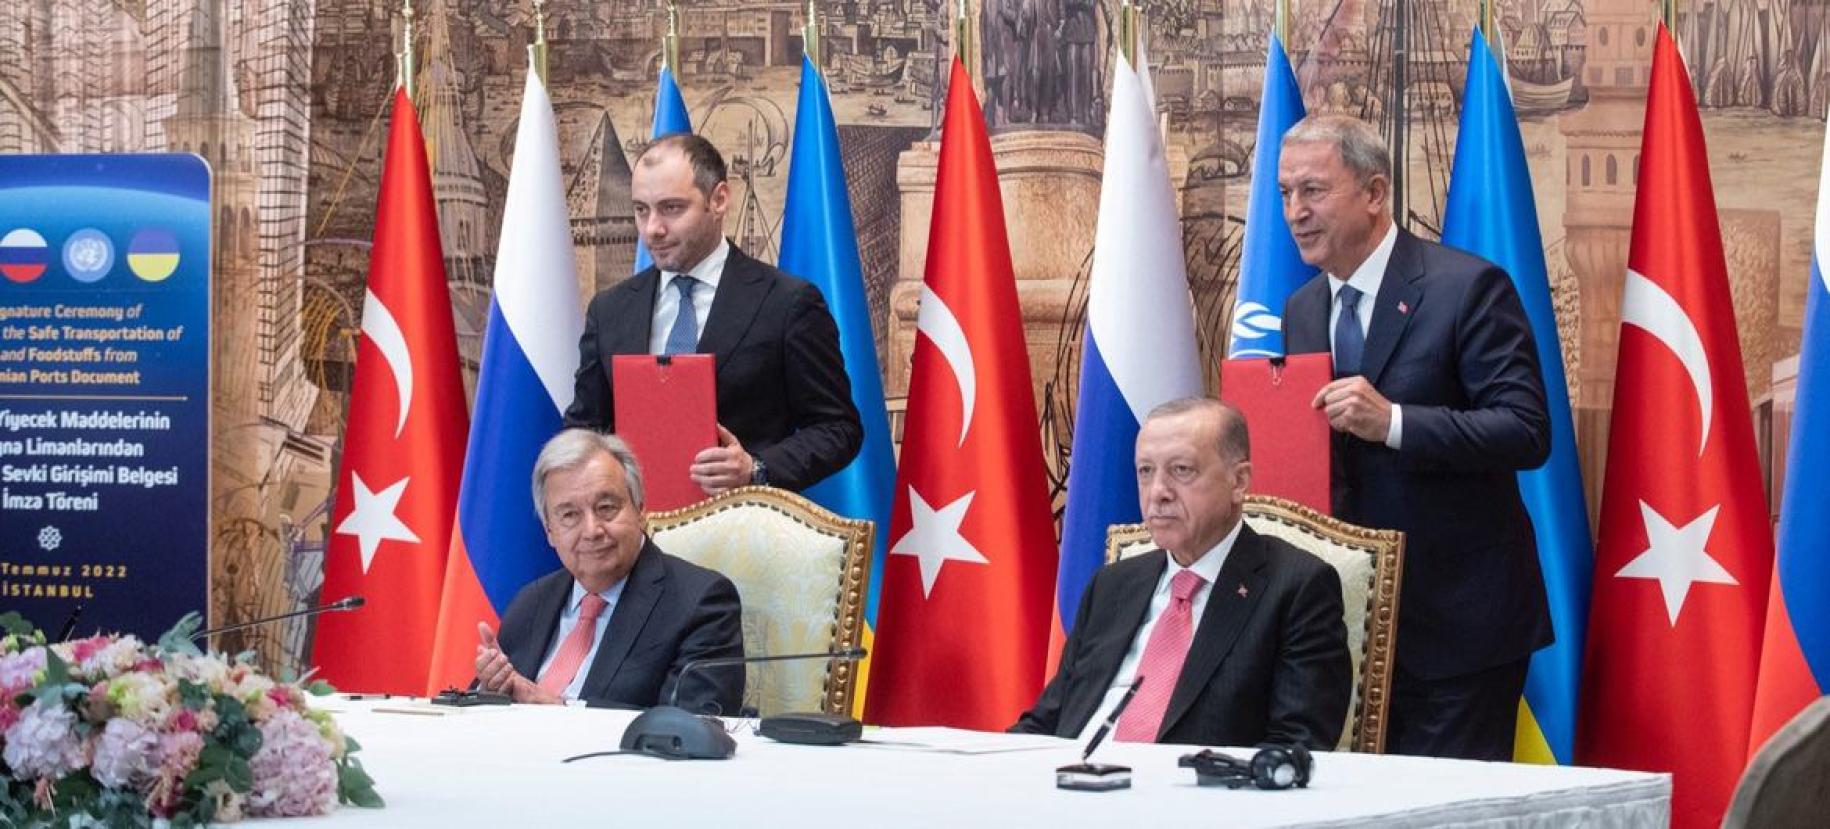 Two men in suits sit at a table with microphones ahead of them, with aides standing behind them. The table is adorned with Russian, Turkish, and UN flags.